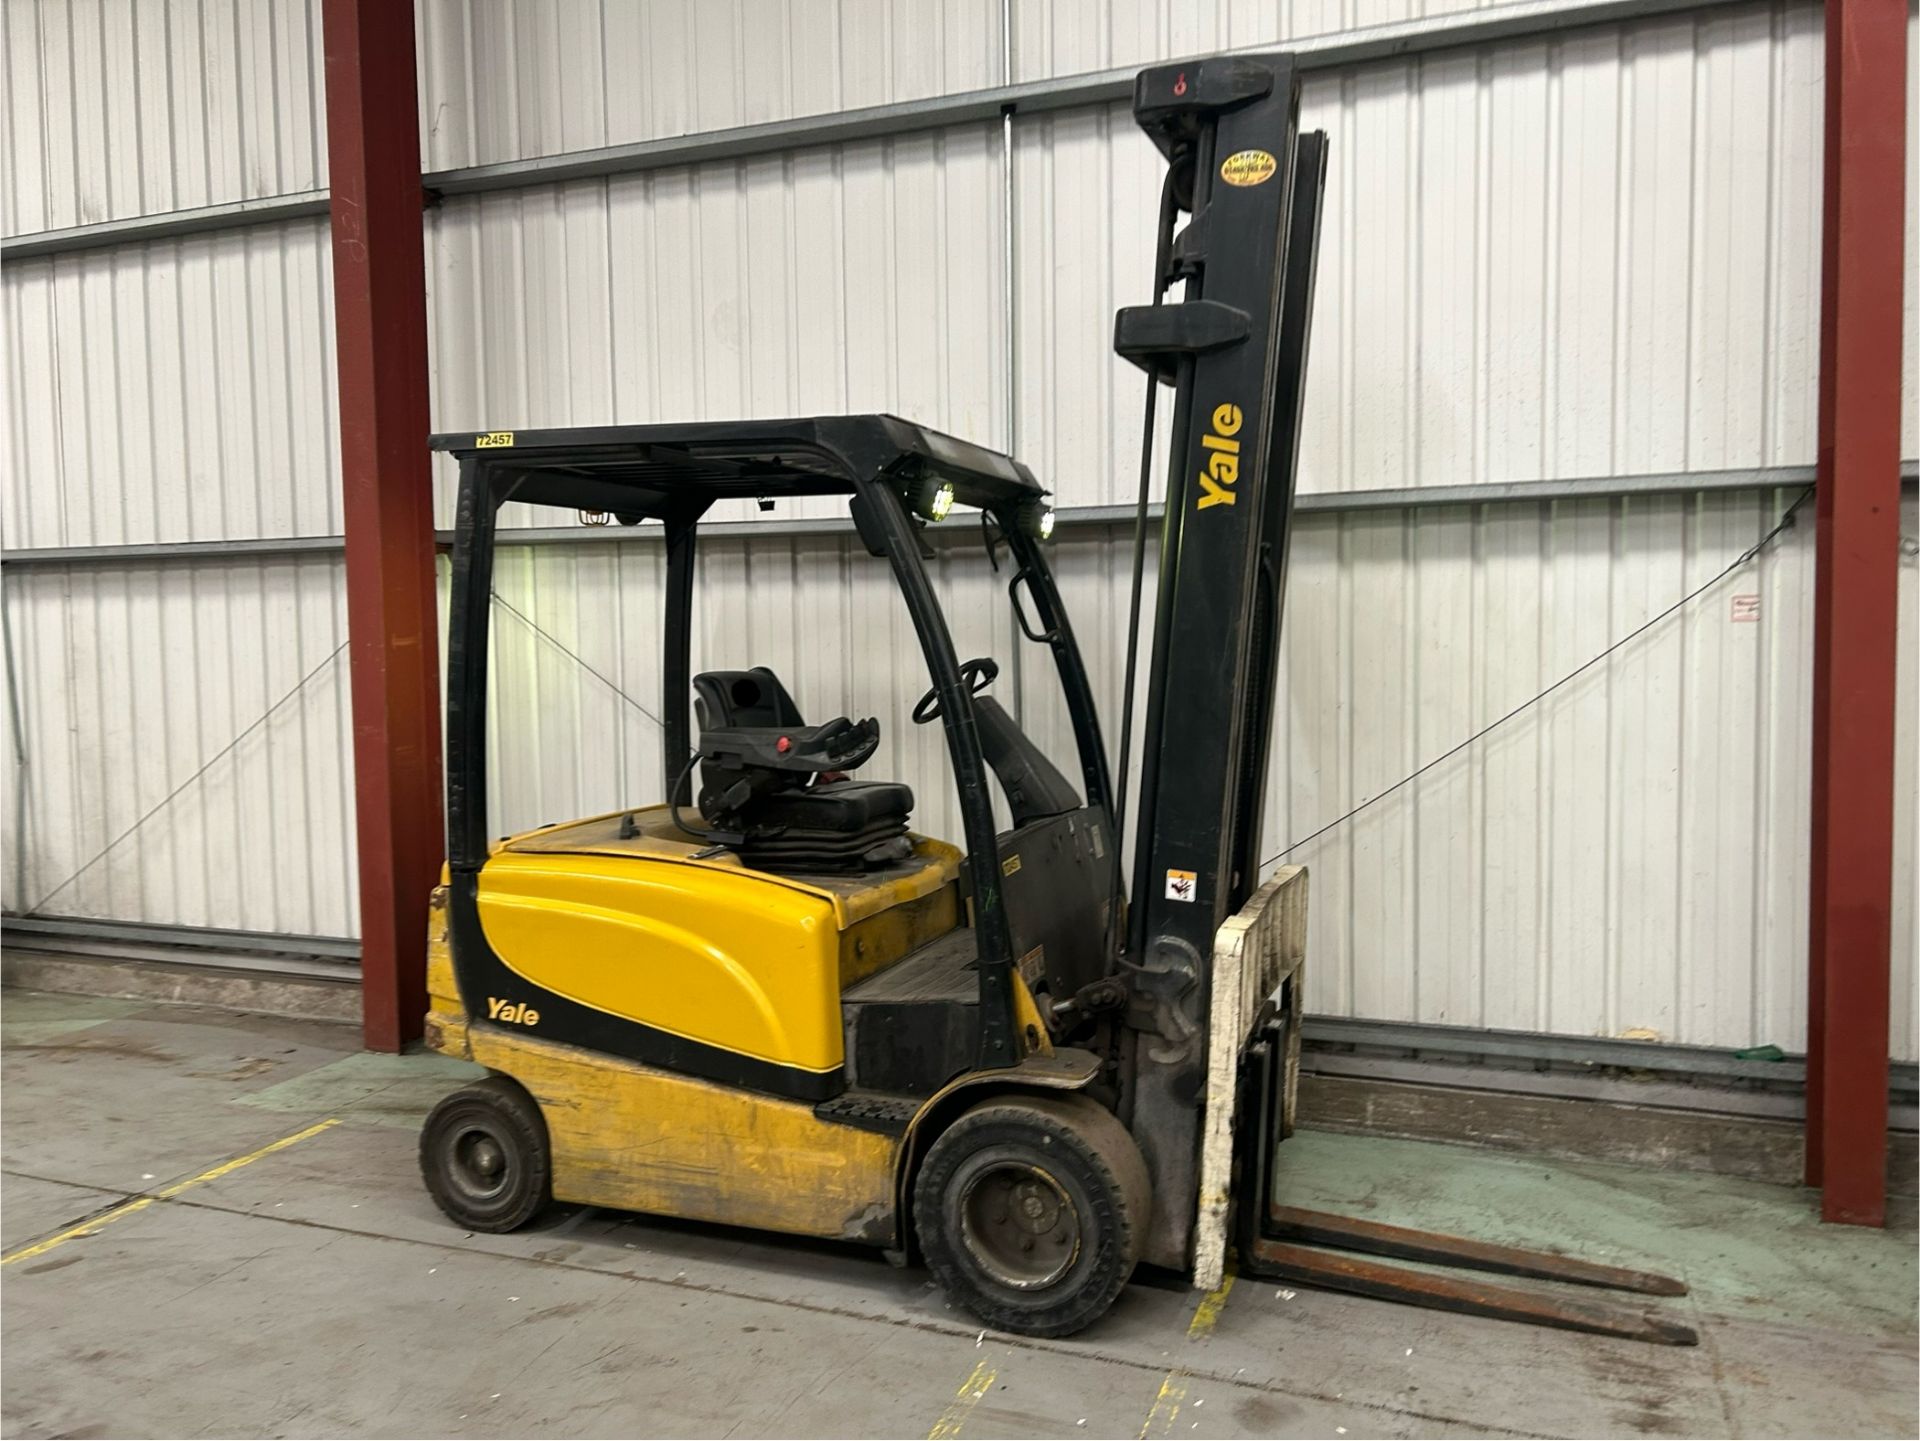 ELECTRIC - 4 WHEELS YALE ERP25VL **(INCLUDES CHARGER)**